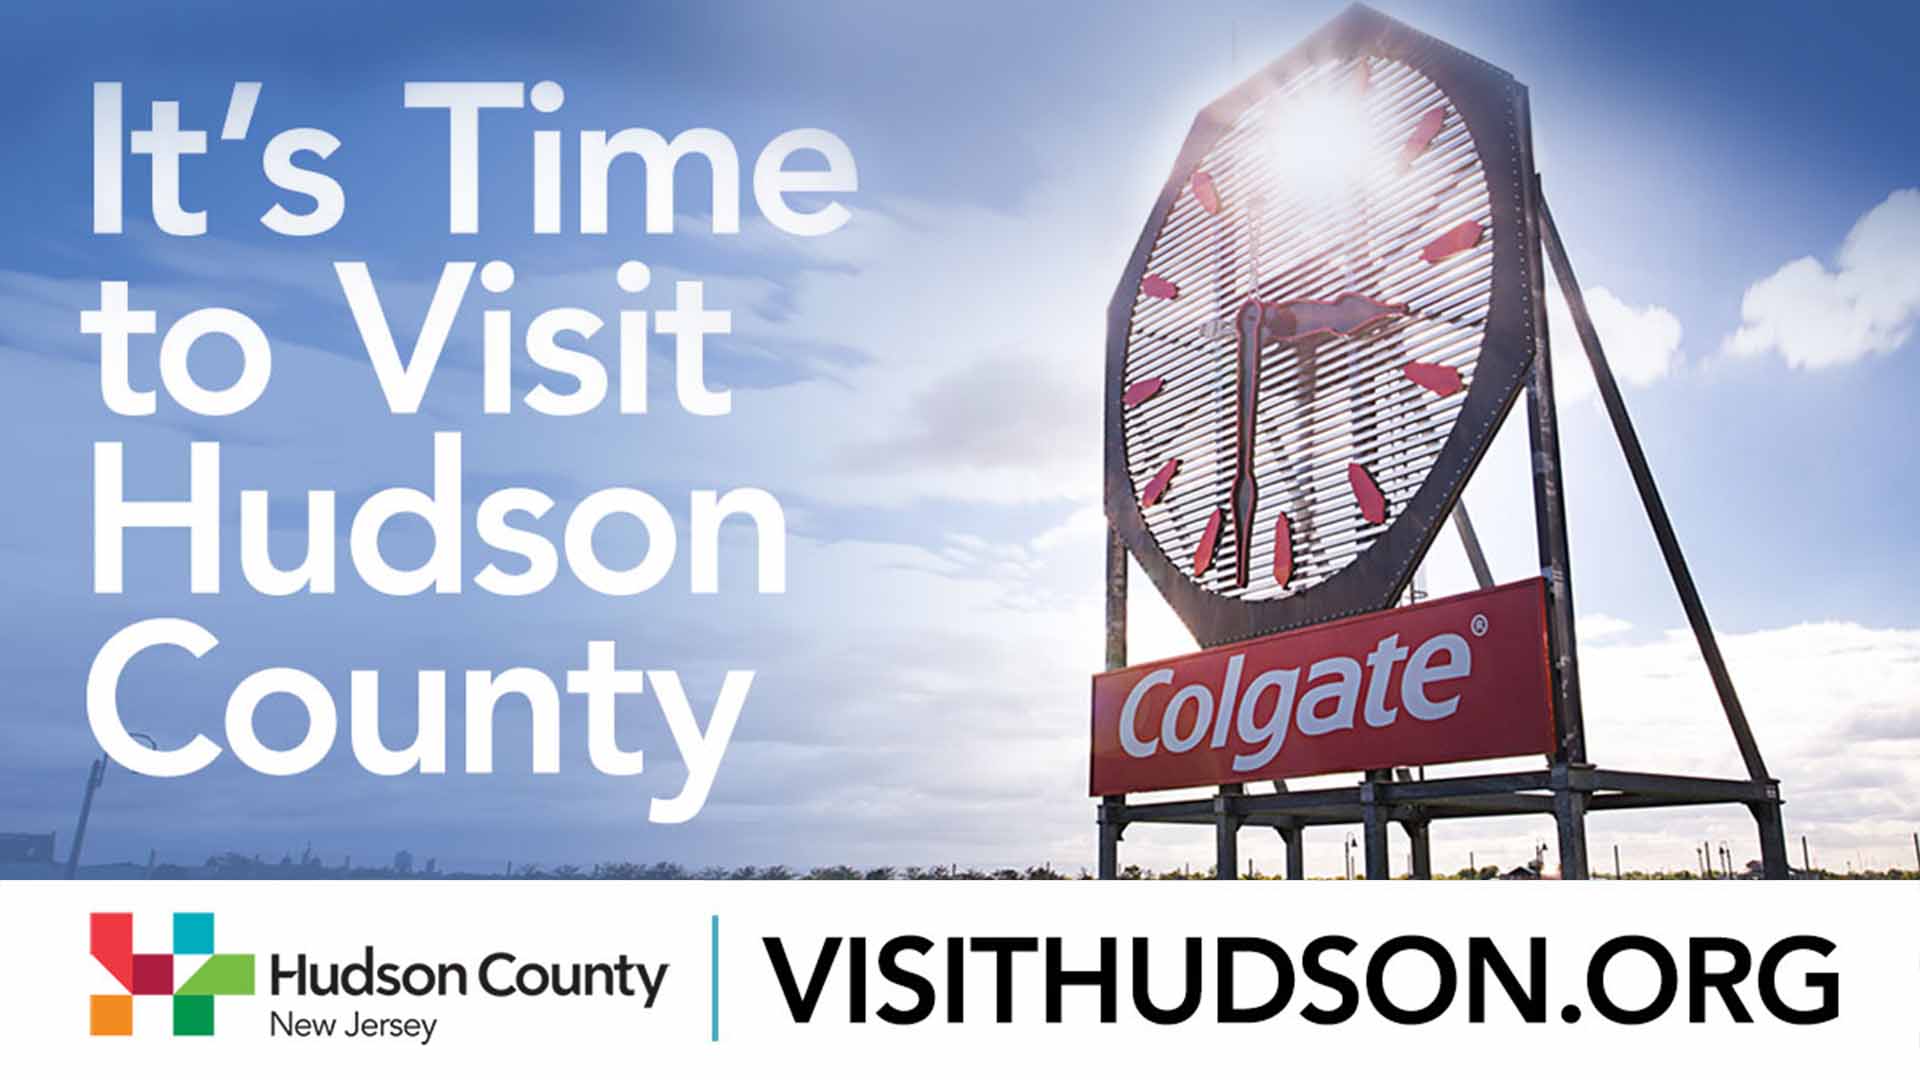 It's time to visit Hudson County